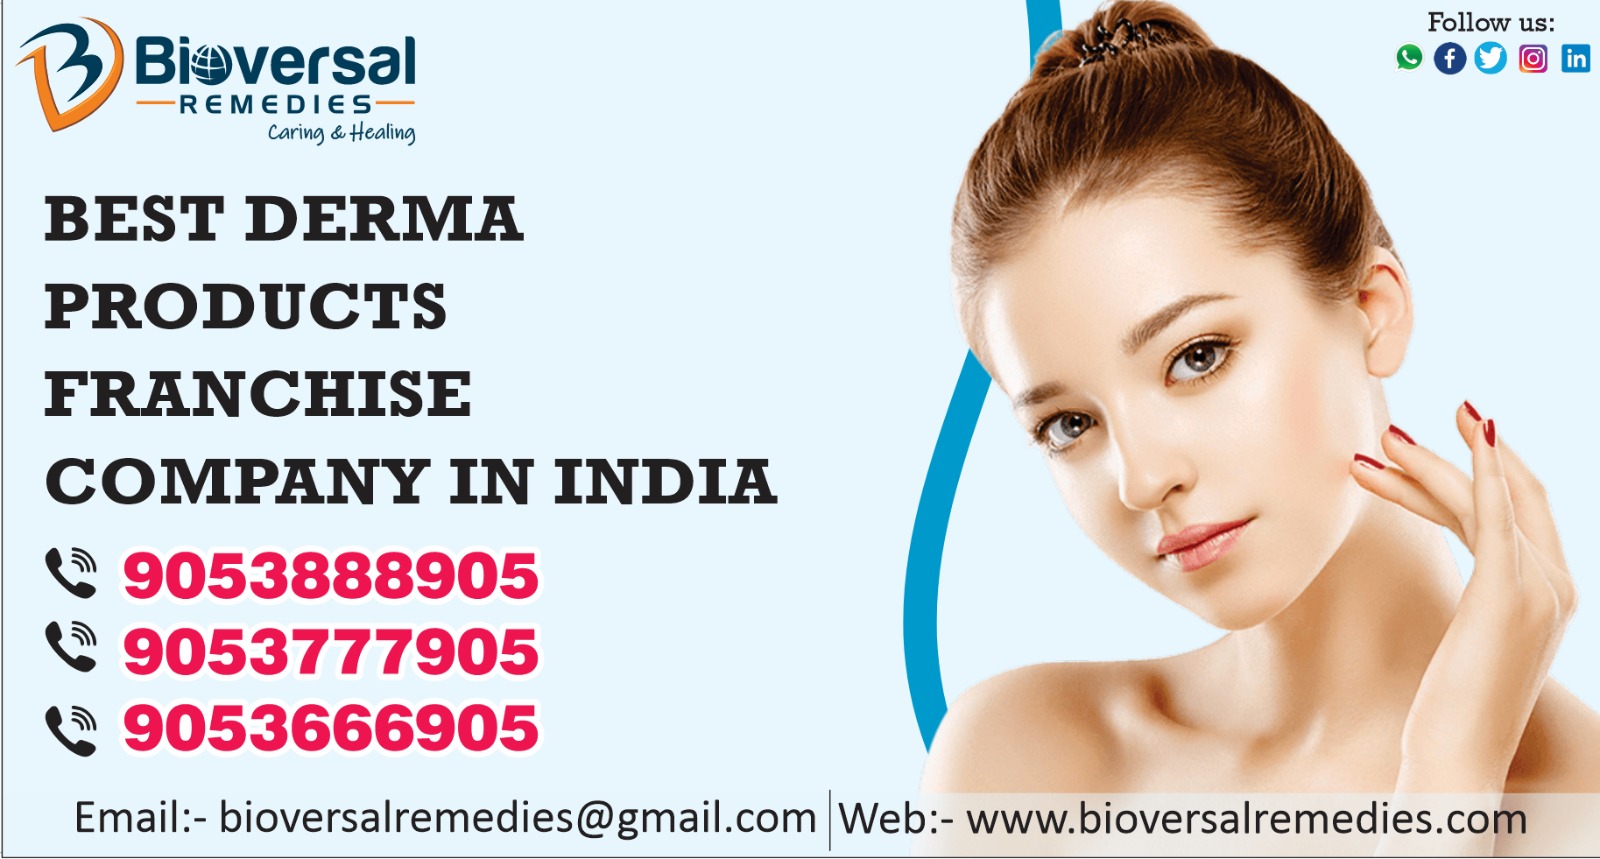 Best Derma Products Franchise Company in India